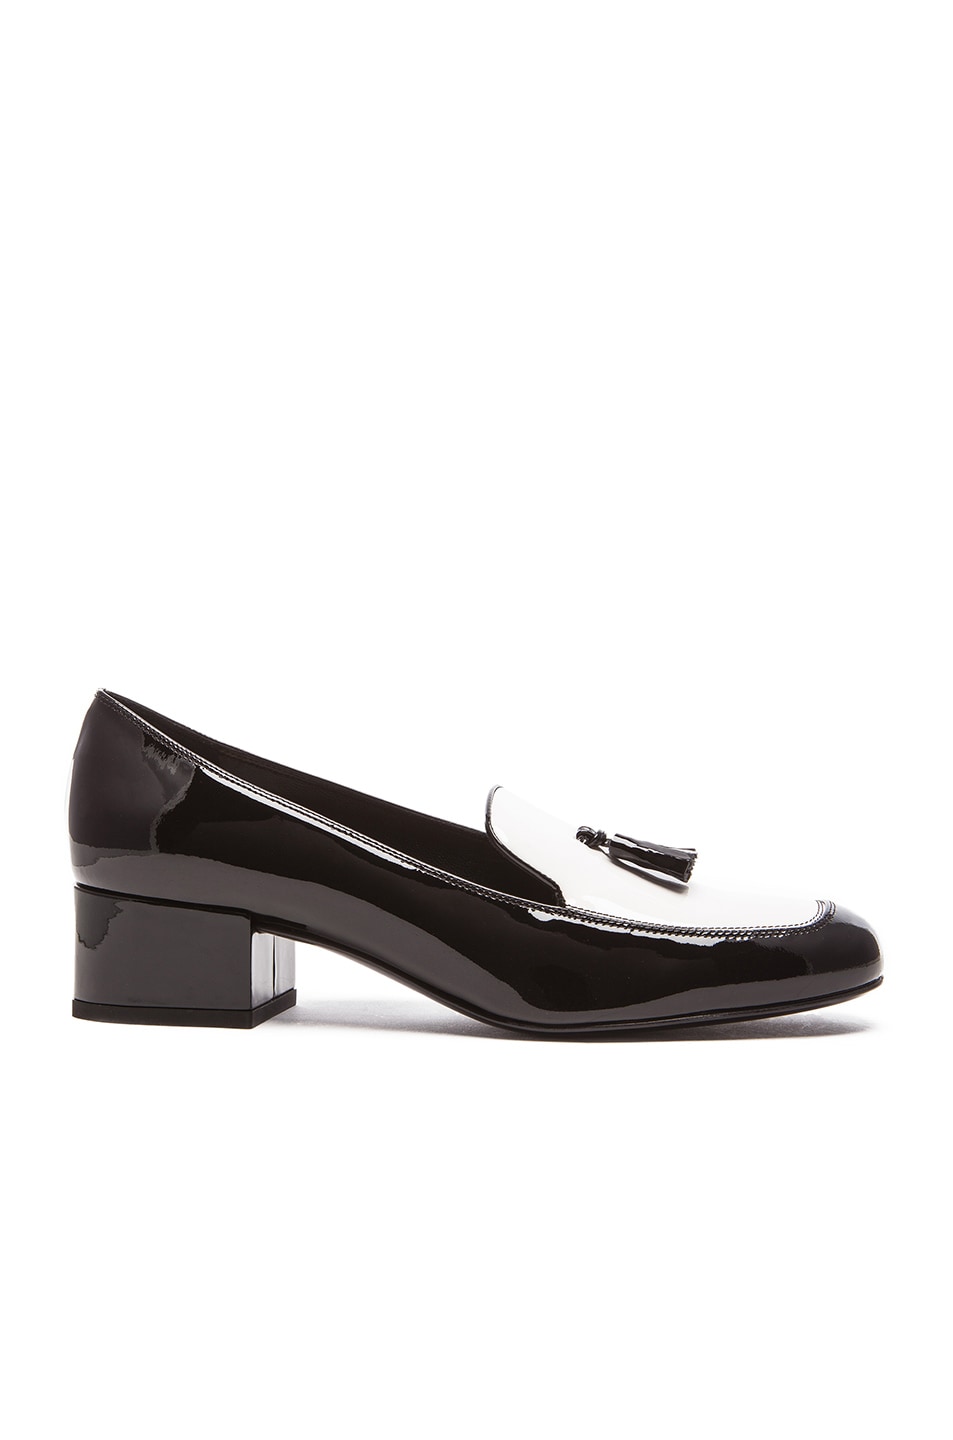 Image 1 of Saint Laurent Babies Patent Leather Loafers in Black & White